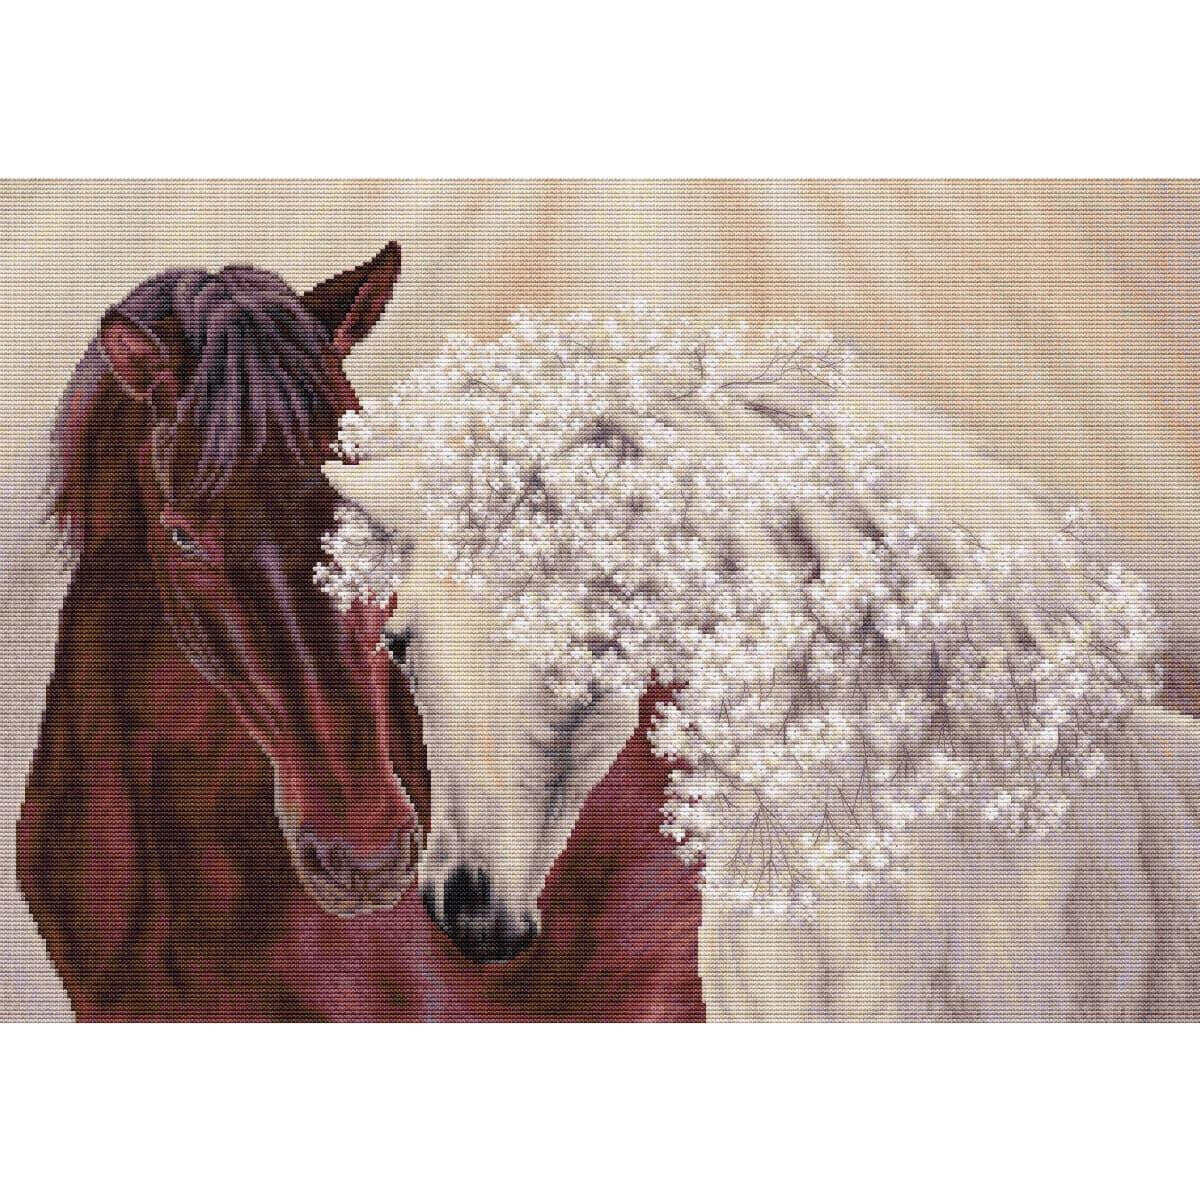 An artistic depiction of two horses, one brown and one...